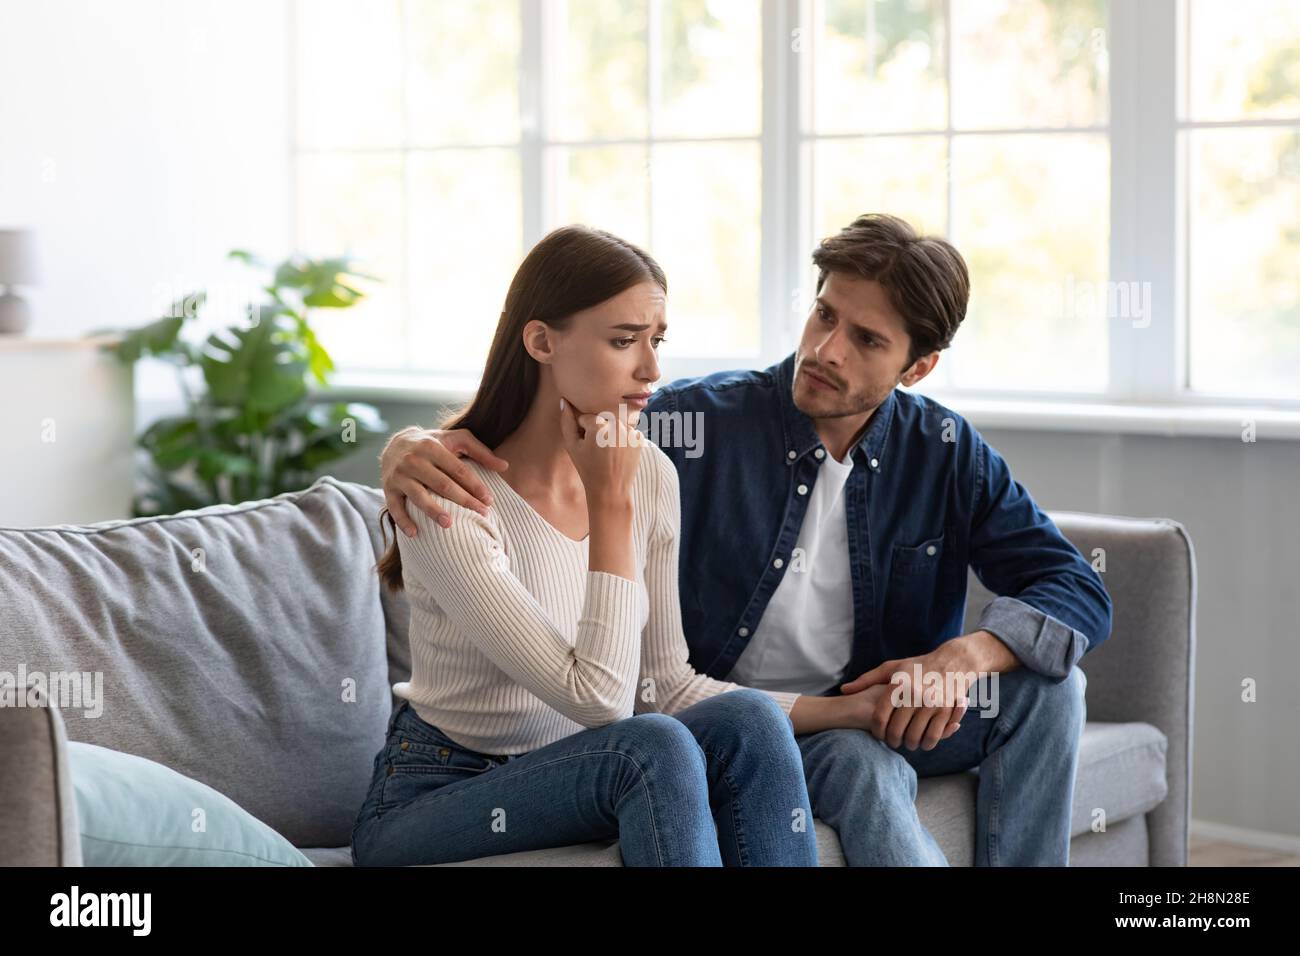 Serious careful young european guy calms upset unhappy lady in living room interior Stock Photo